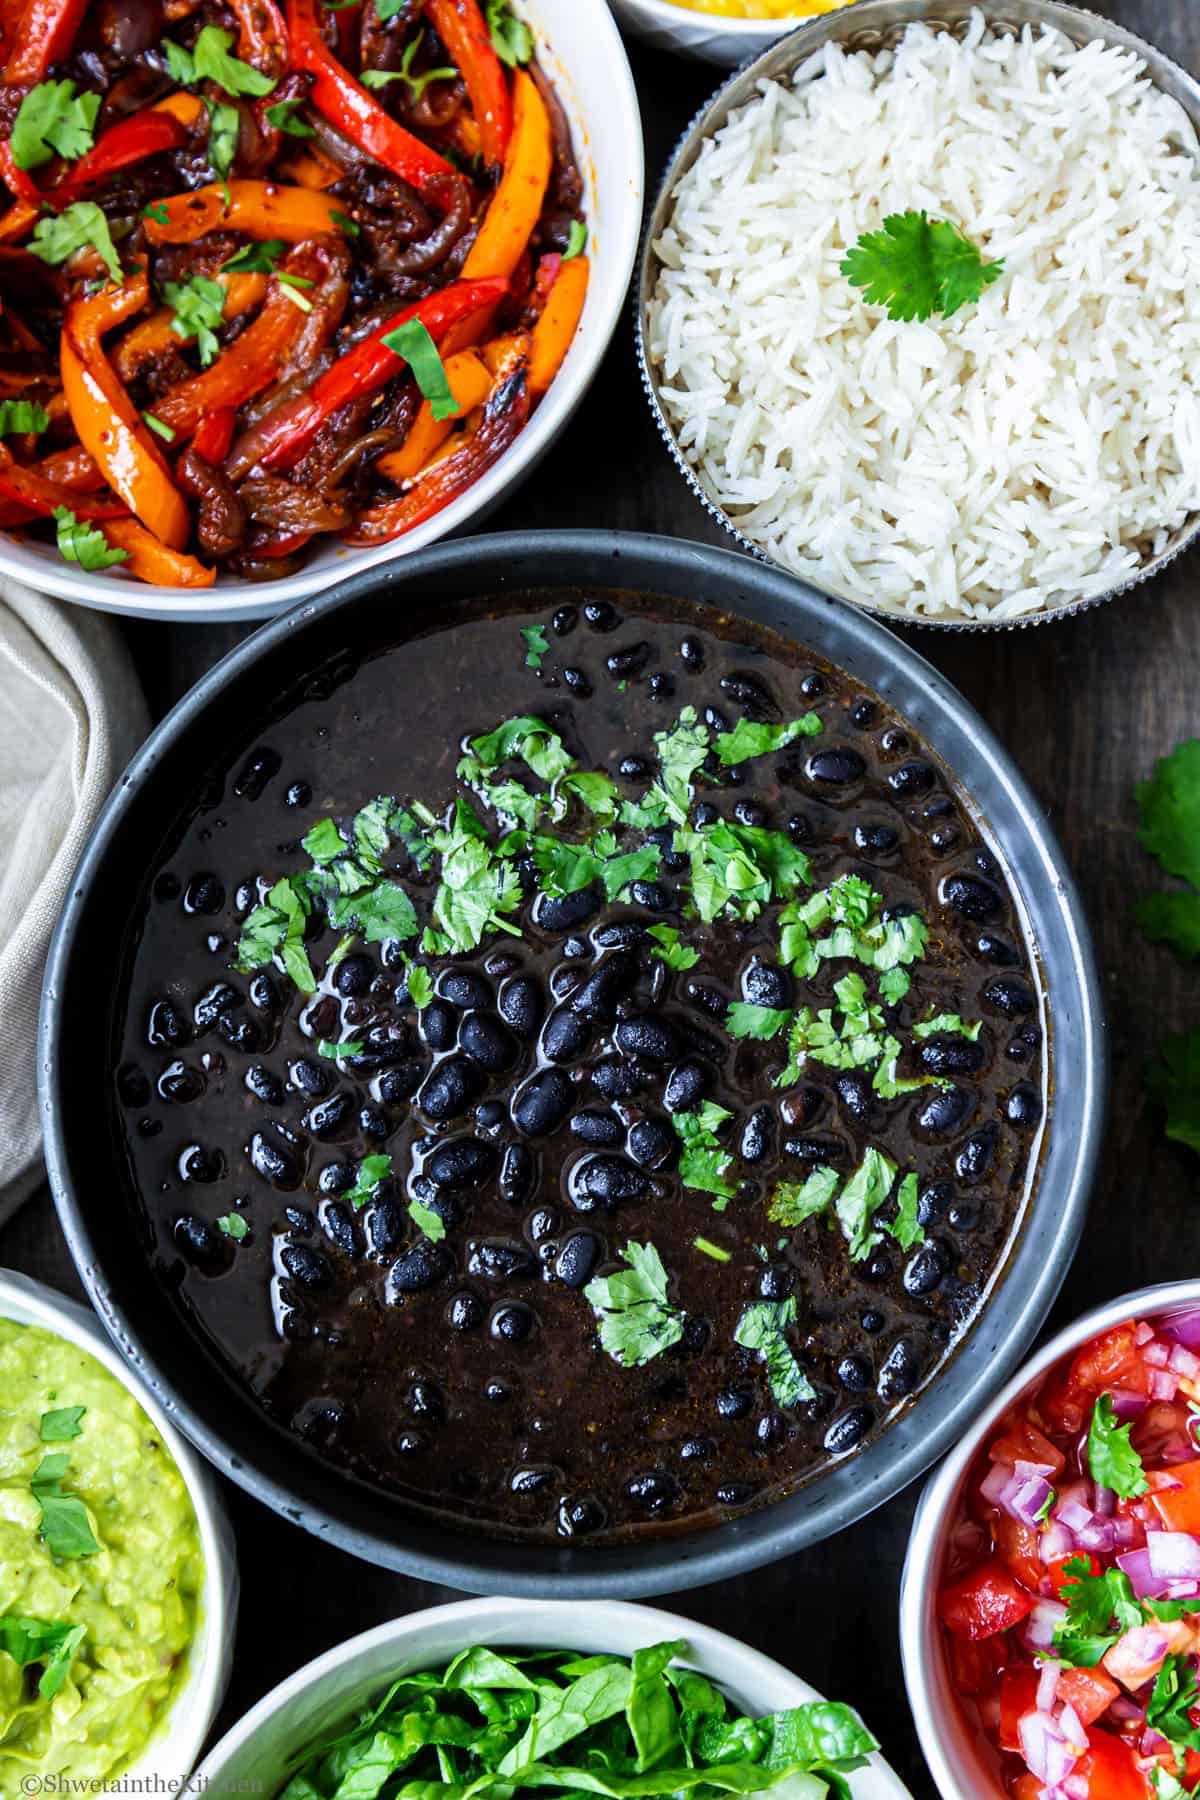 Top view of Instant Pot black beans curry bowl in center with bowls of rice, pico, guacamole, lettuce, and fajita veggies around.